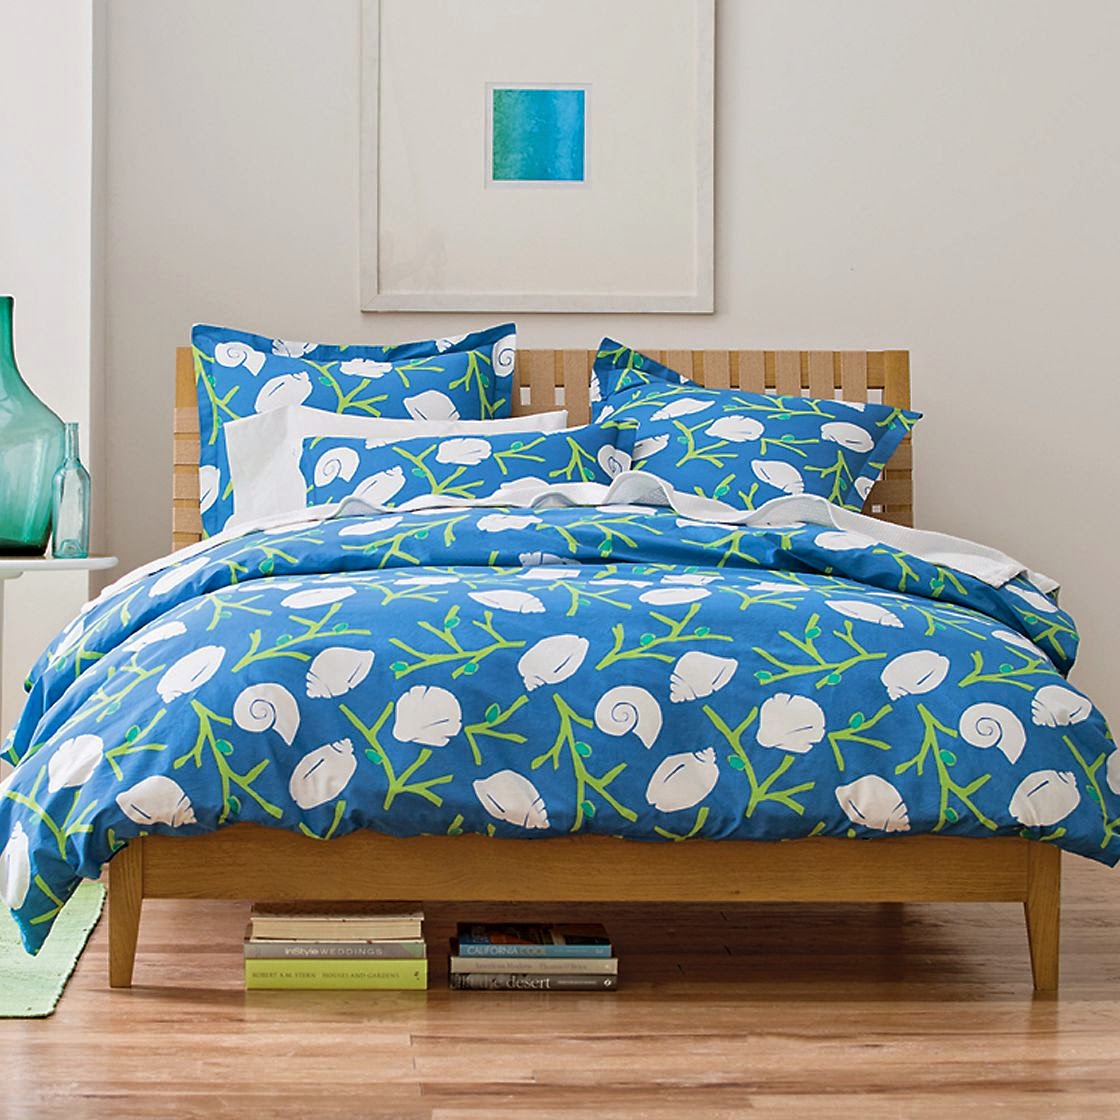 The Company Store nautical bedding Spring 2014